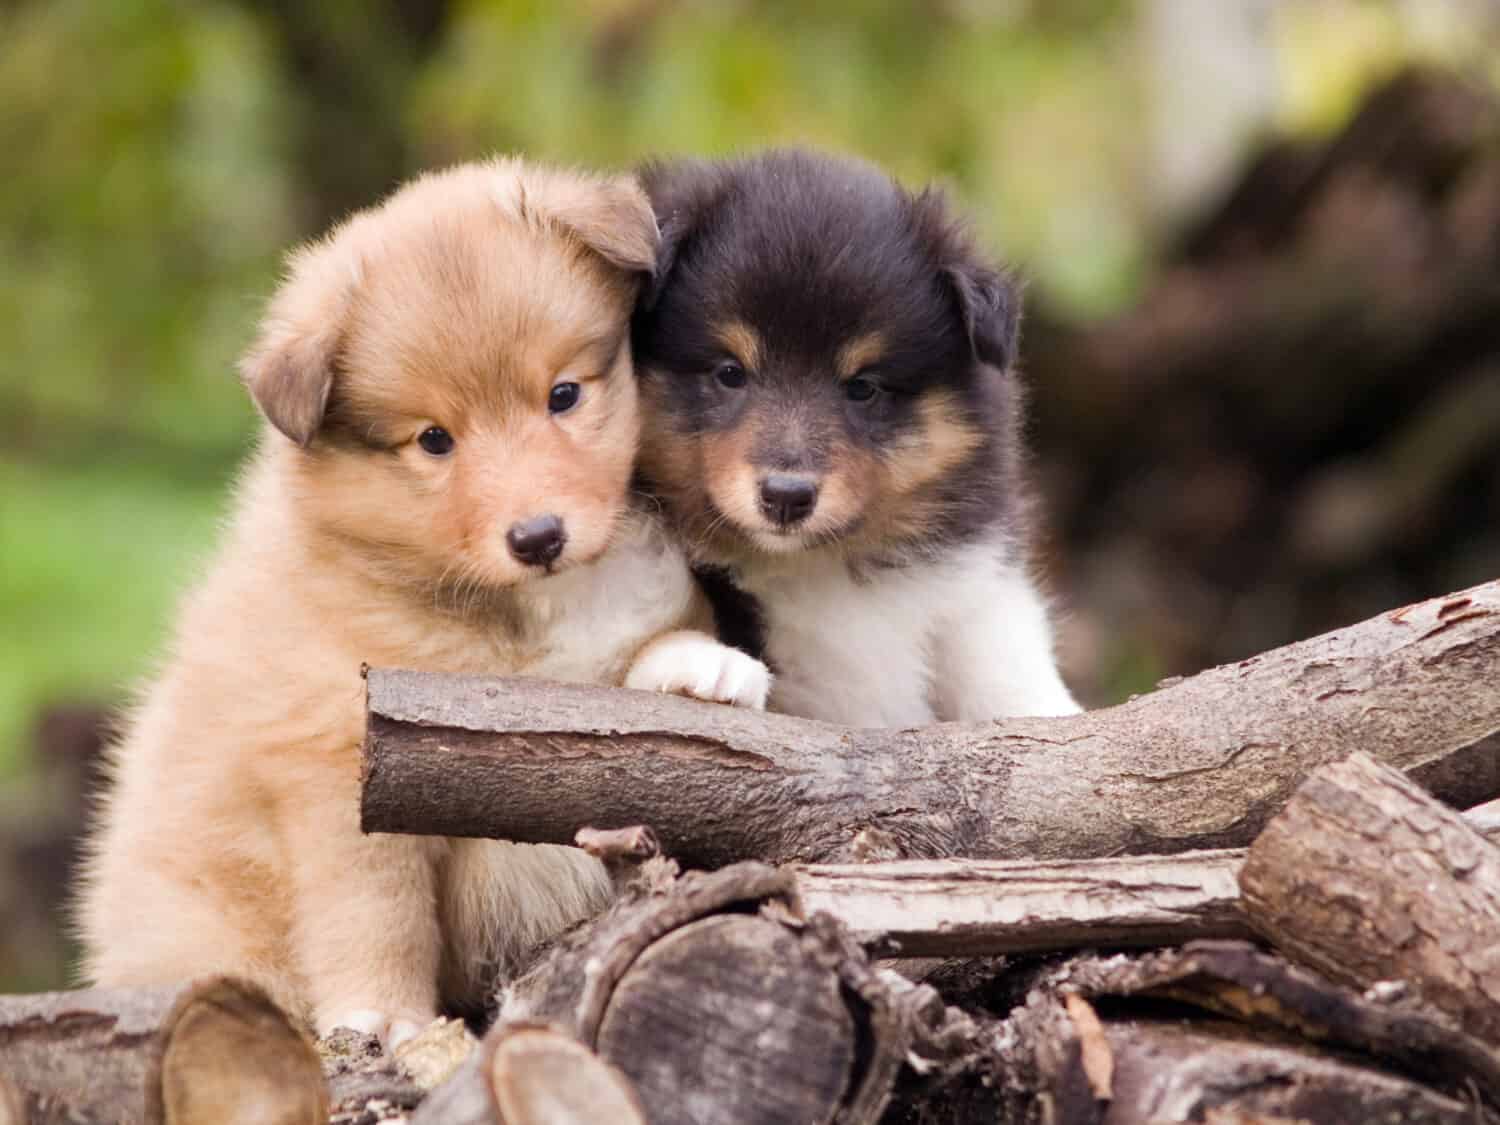 Cute little sheltie puppies sitting close together. They looks forward into camera. One puppy is sable & white color. Other puppy is tricolour.